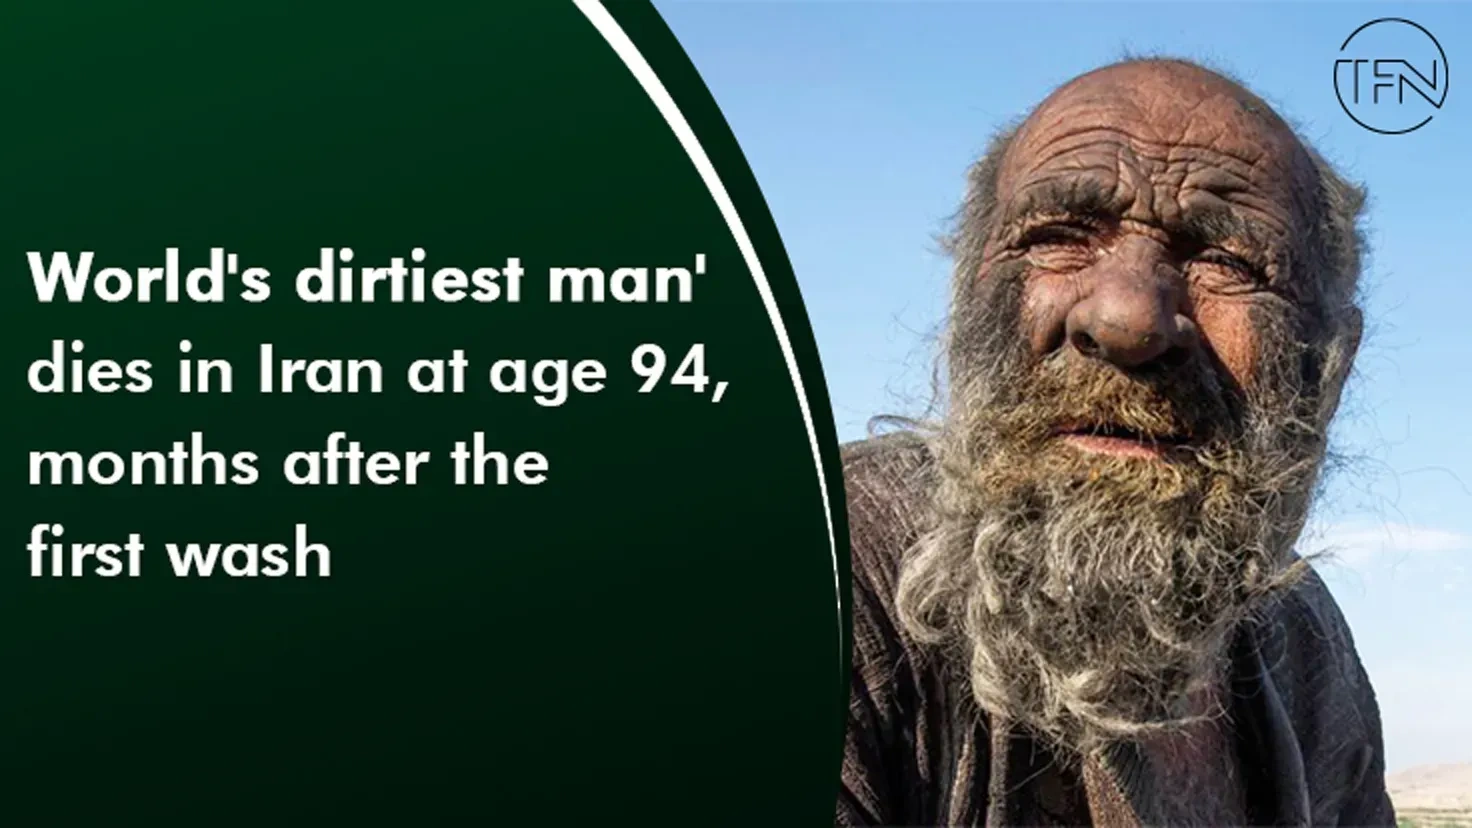 'World's dirtiest man' dies in Iran at age 94, months after the first wash